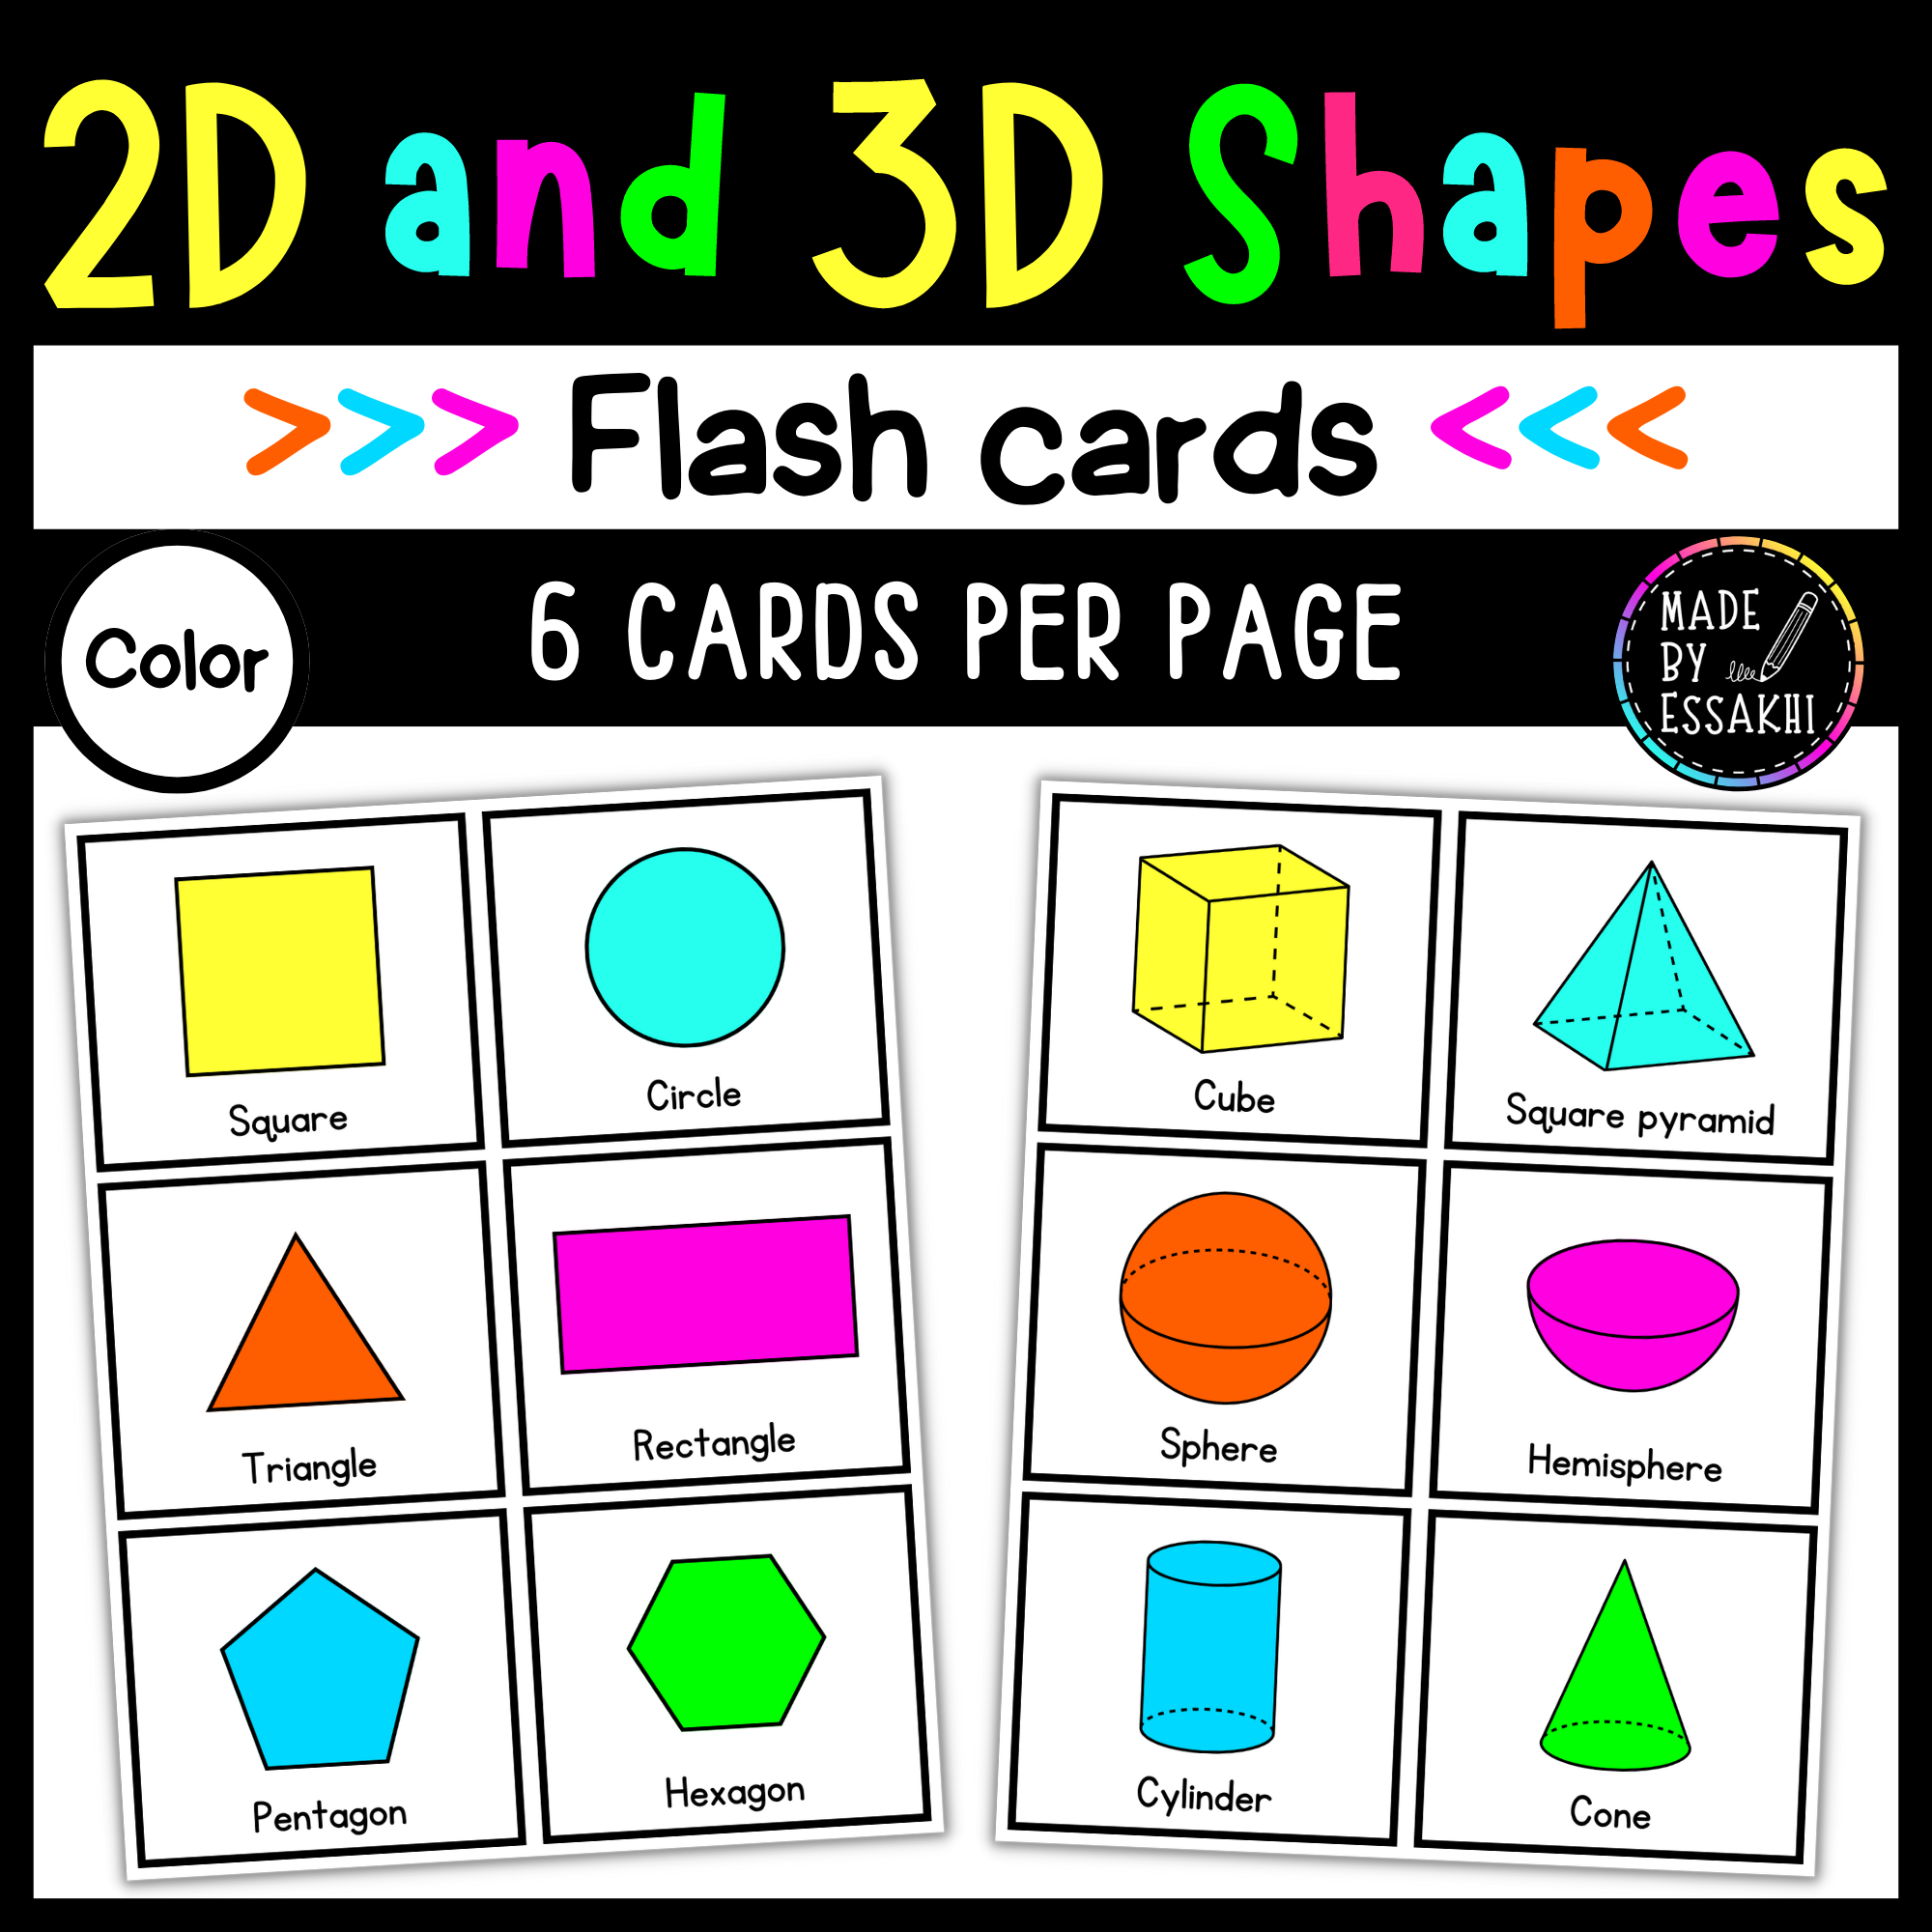 D and d shapes flash cards color made by teachers